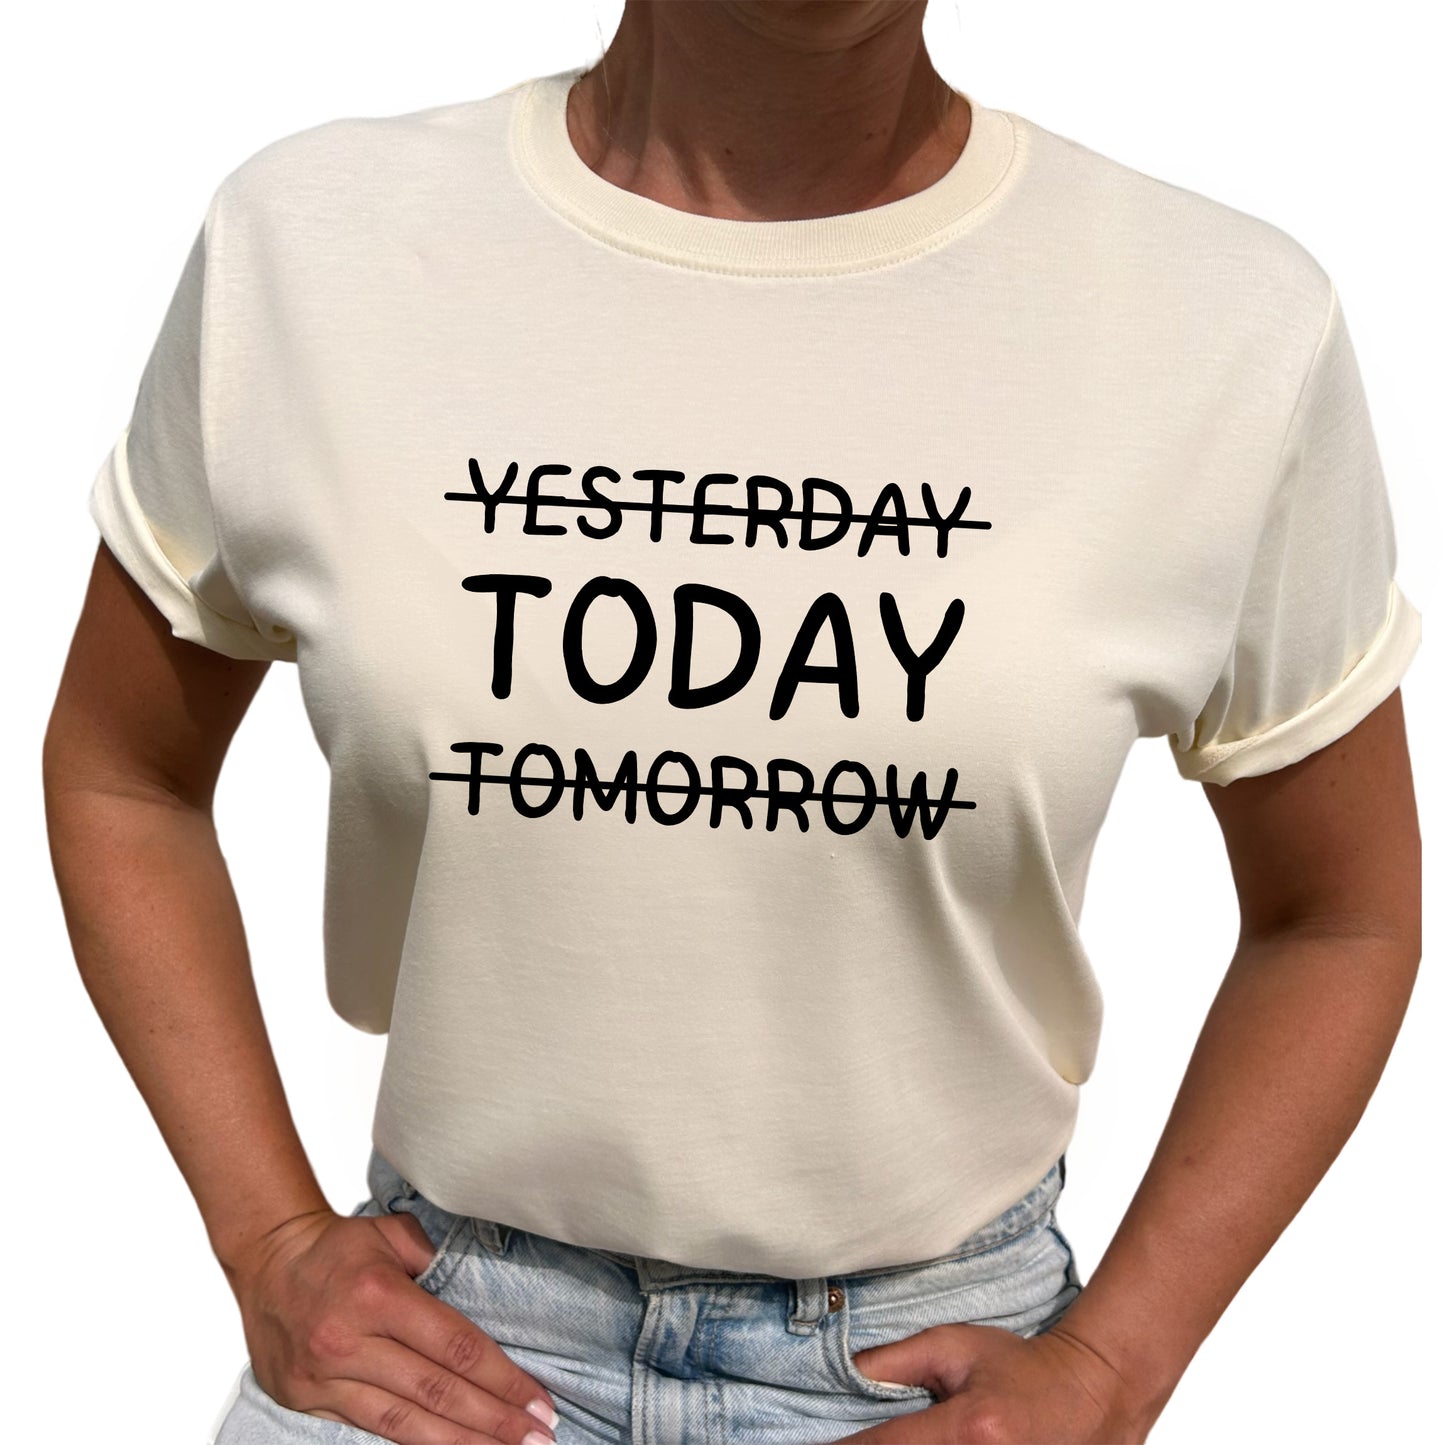 Yesterday Today Tomorrow T-shirt